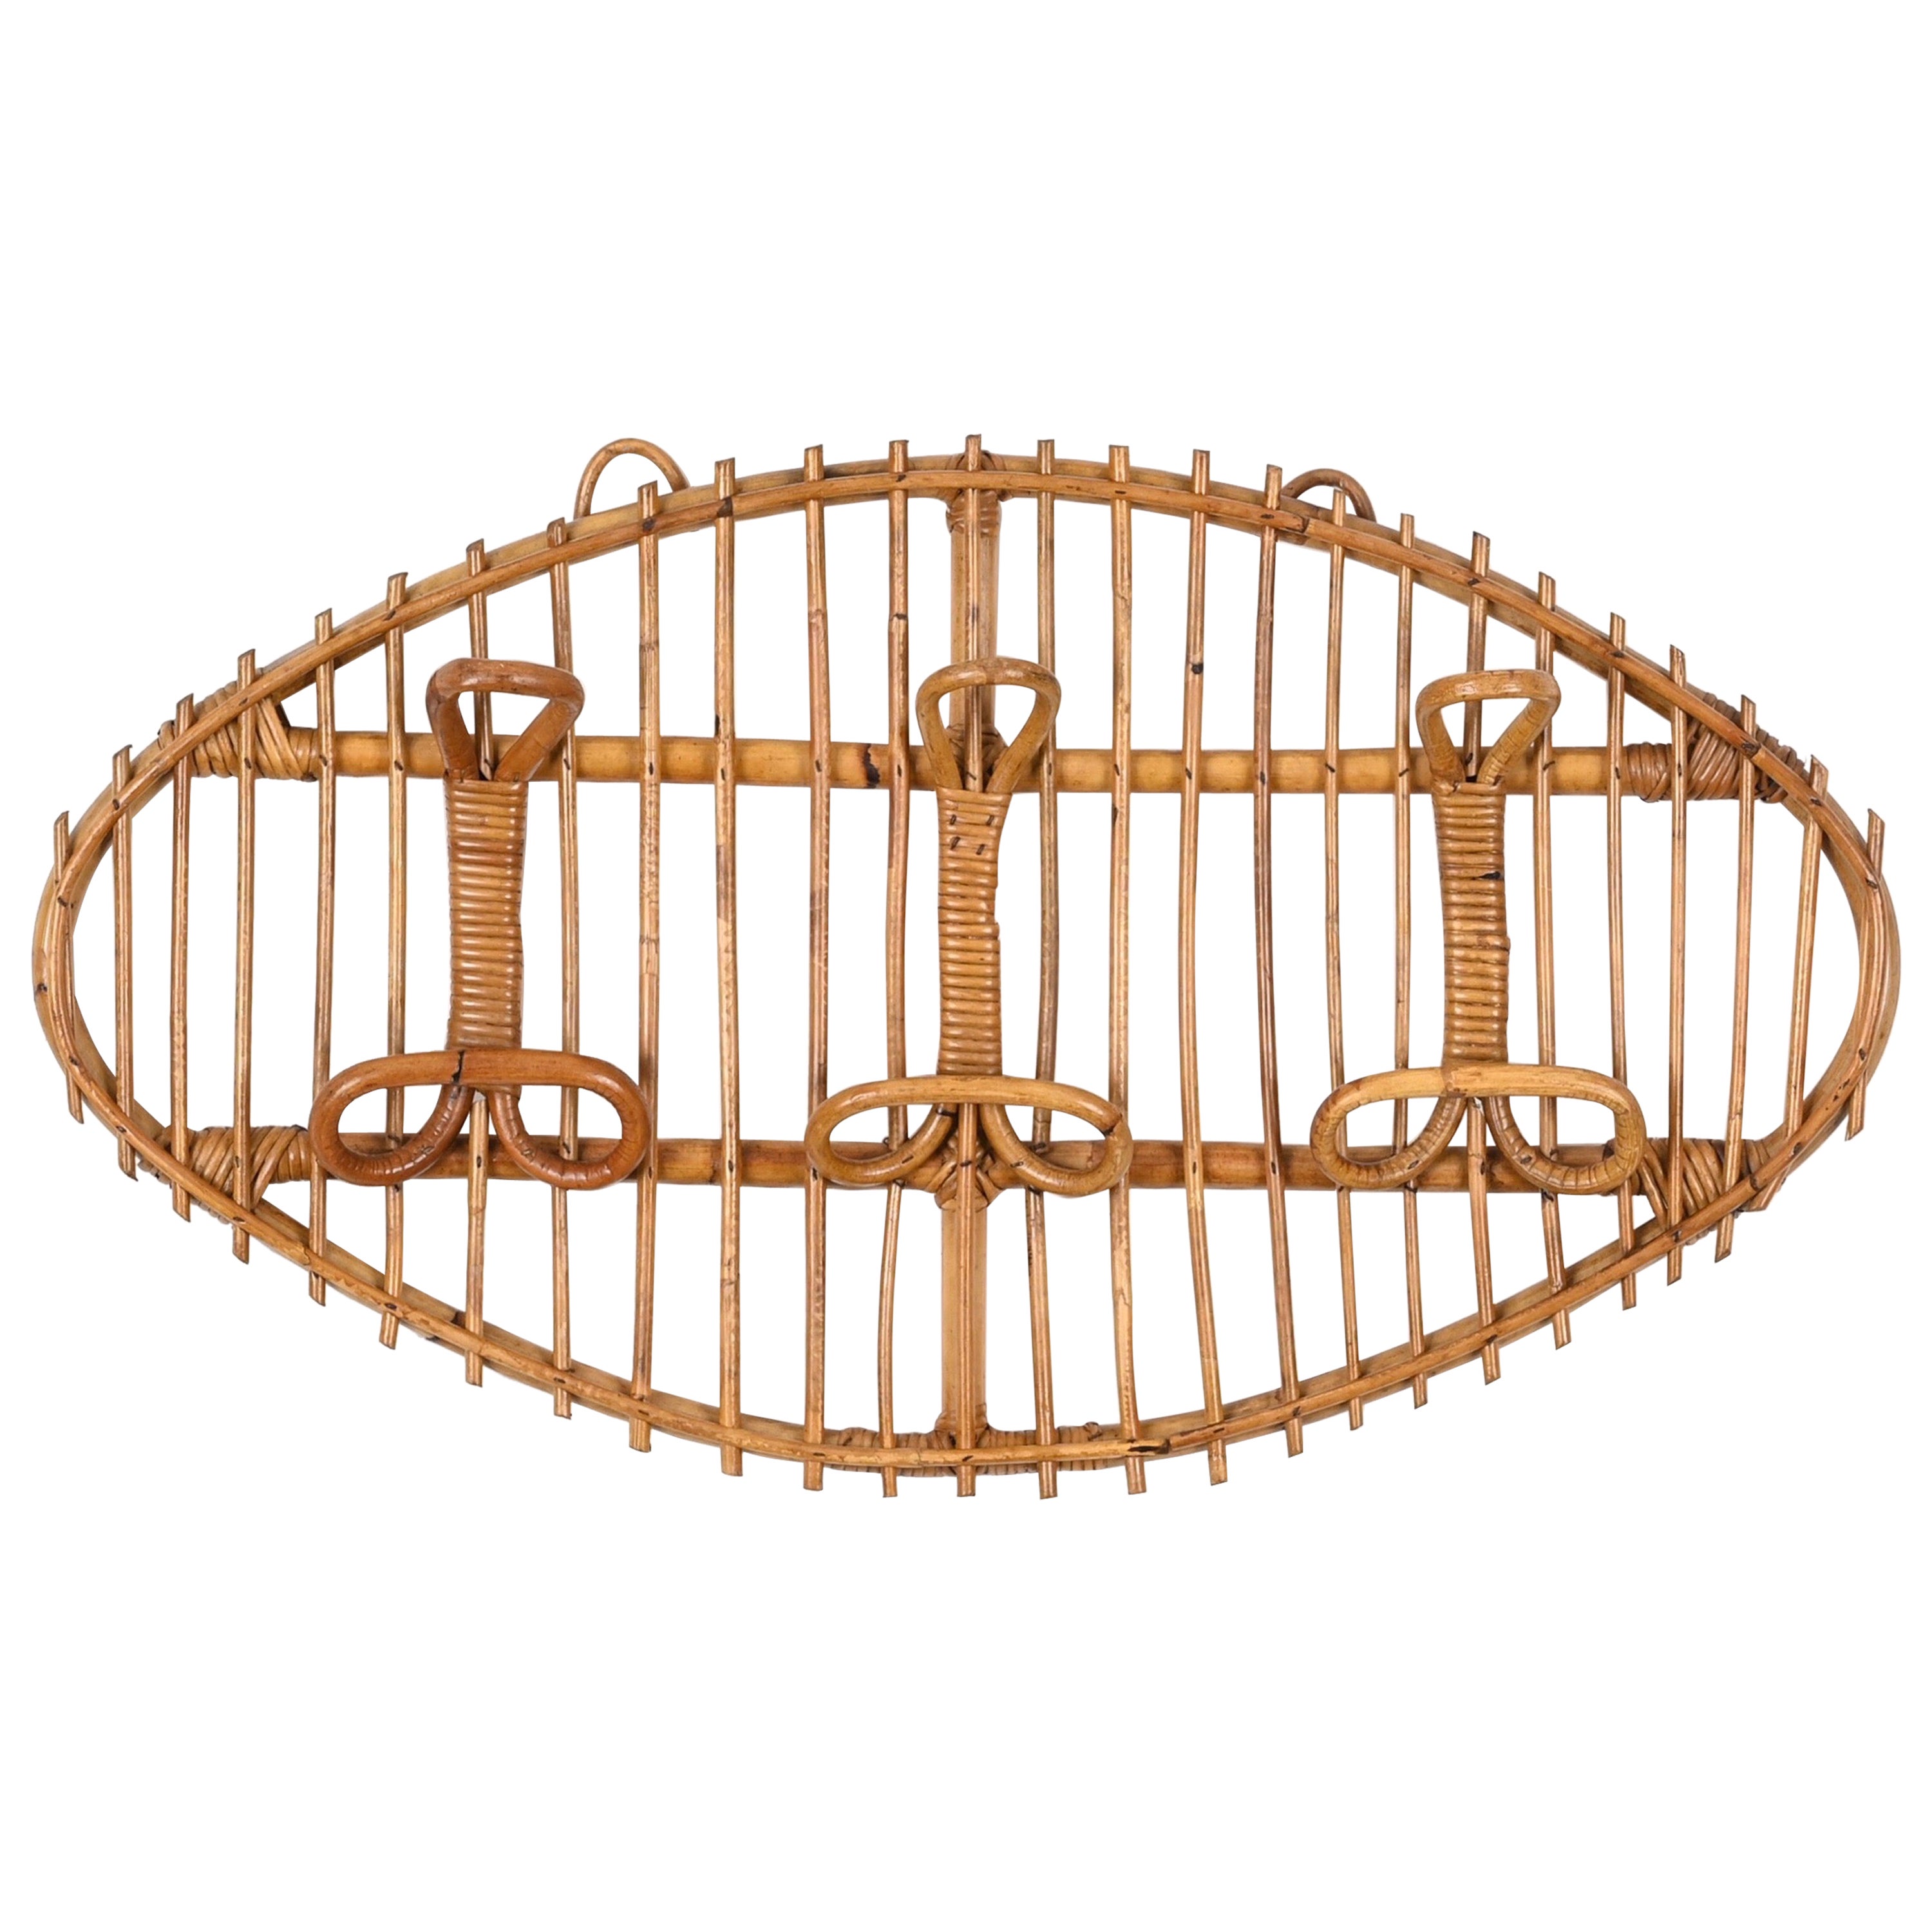 Midcentury French Riviera Rattan, Wicker, Curved Bamboo Coat Rack, Italy 1960s